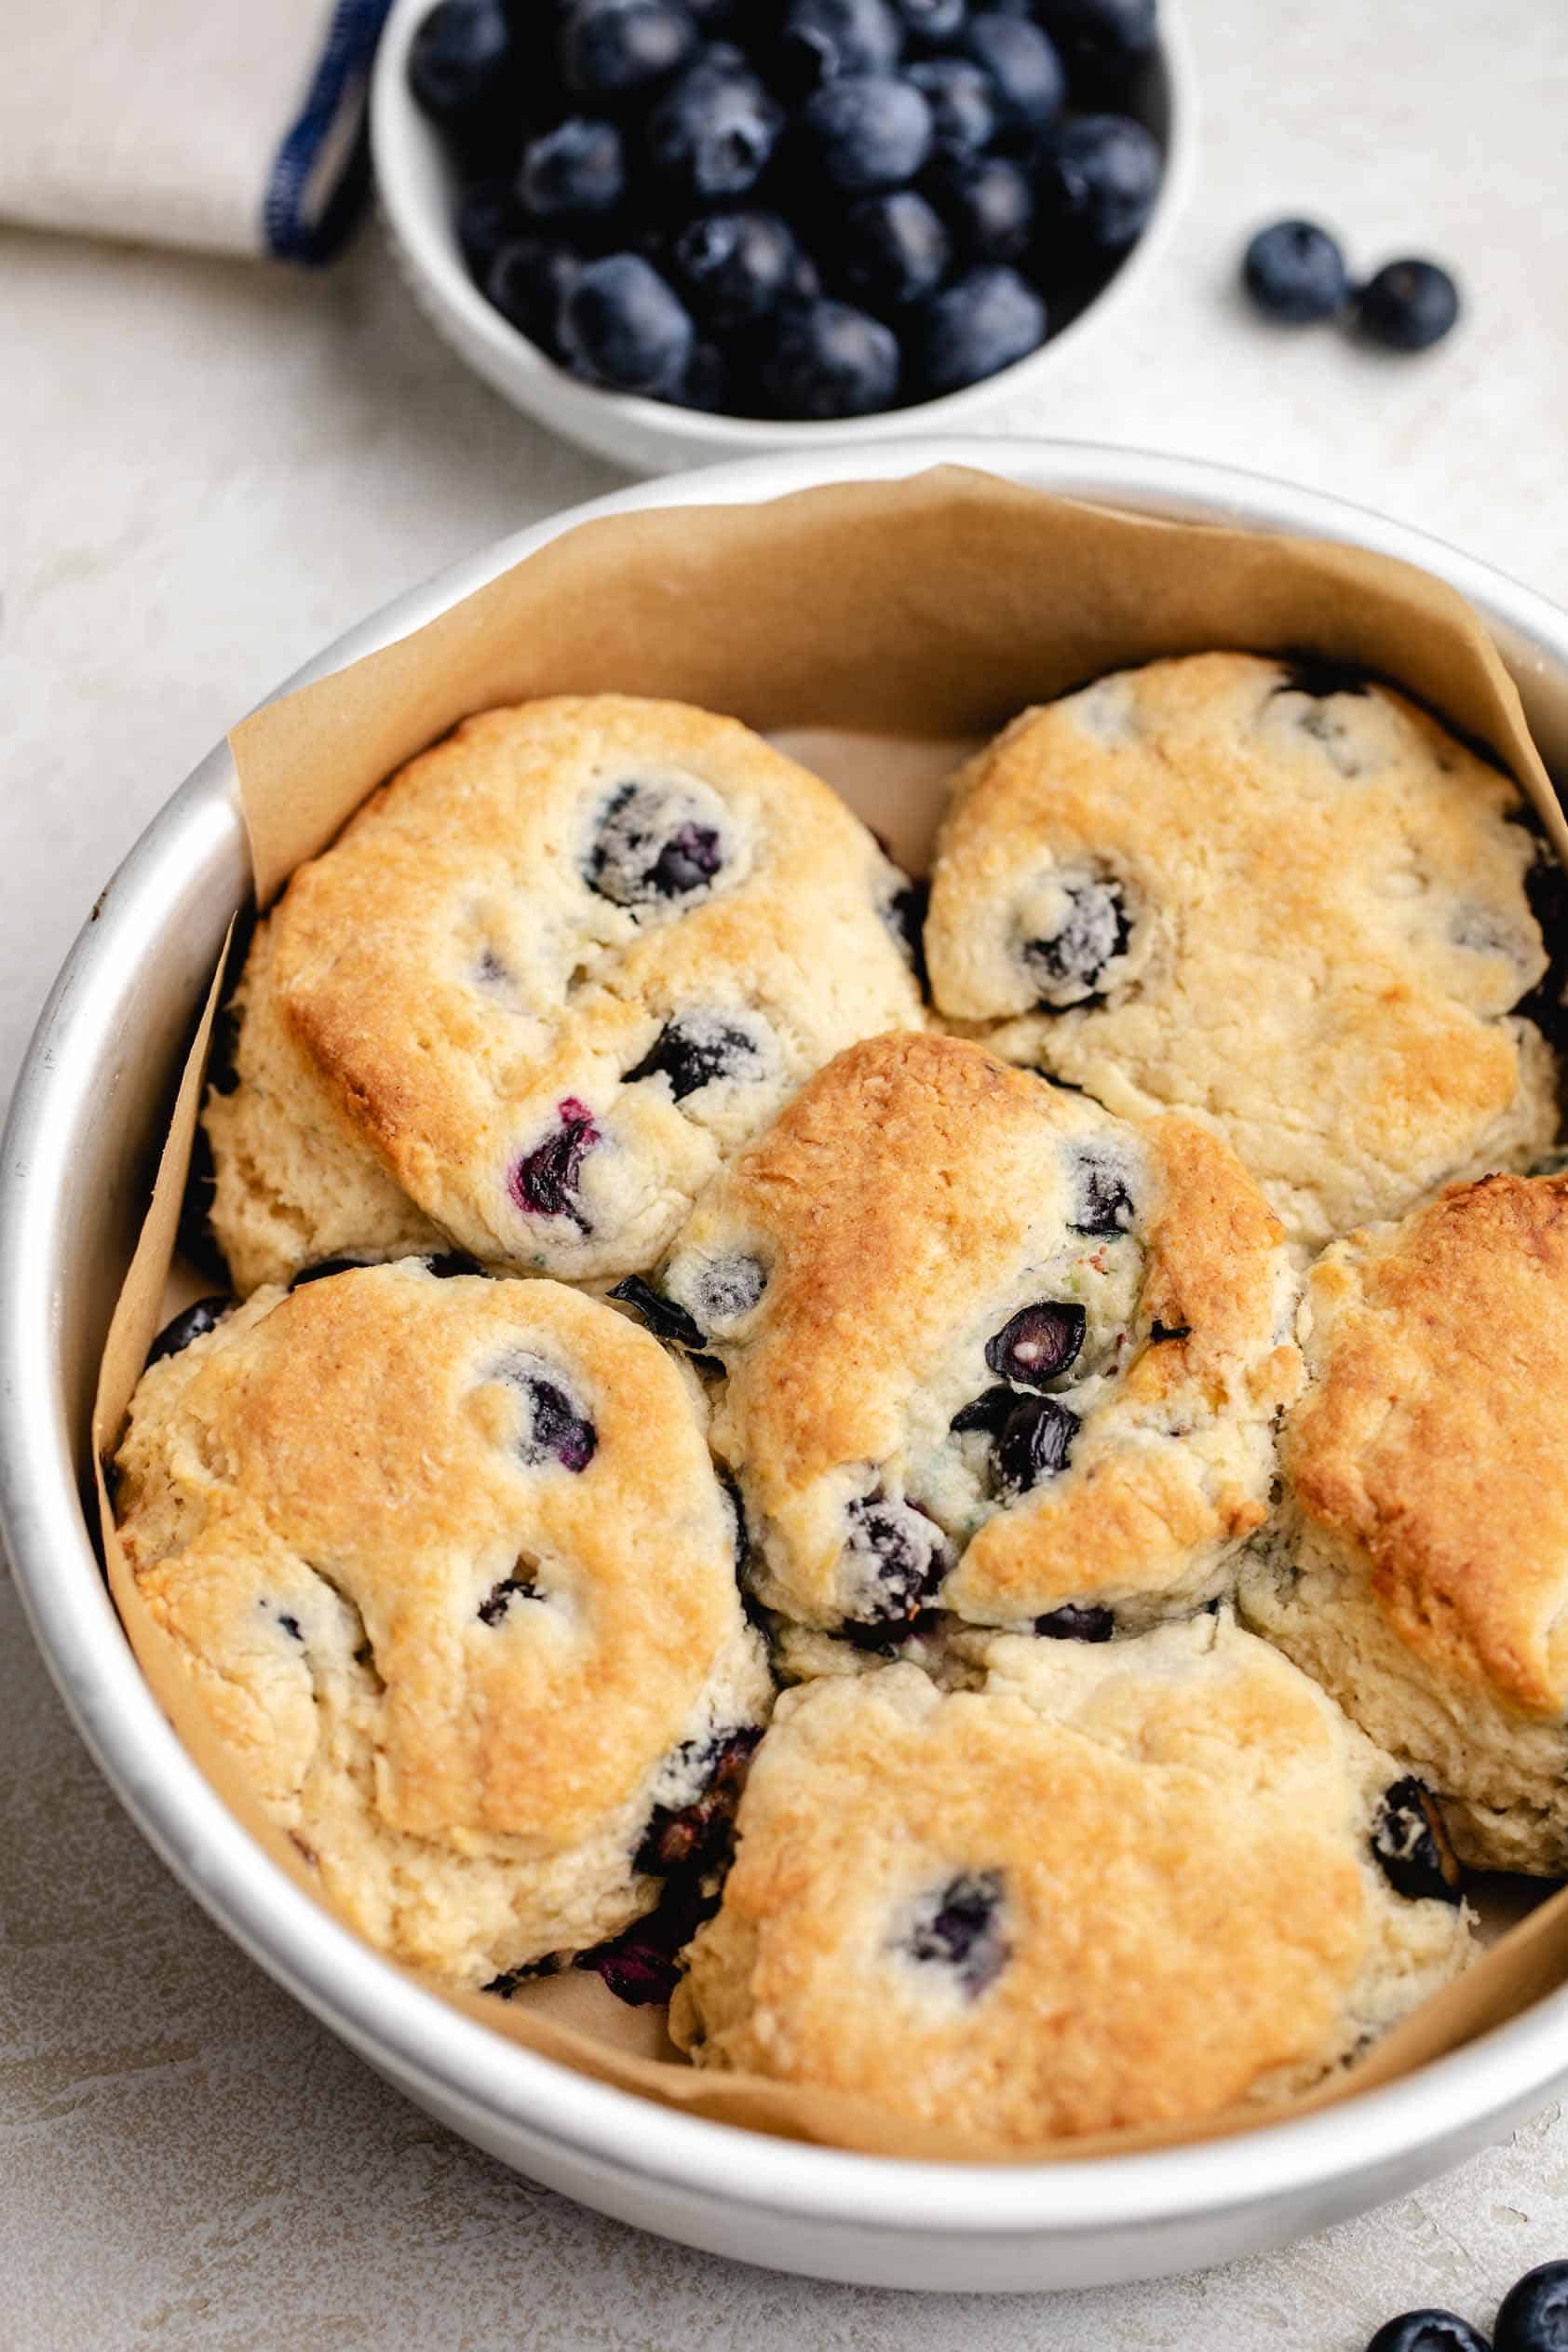 Round pan filled with fruit biscuits.